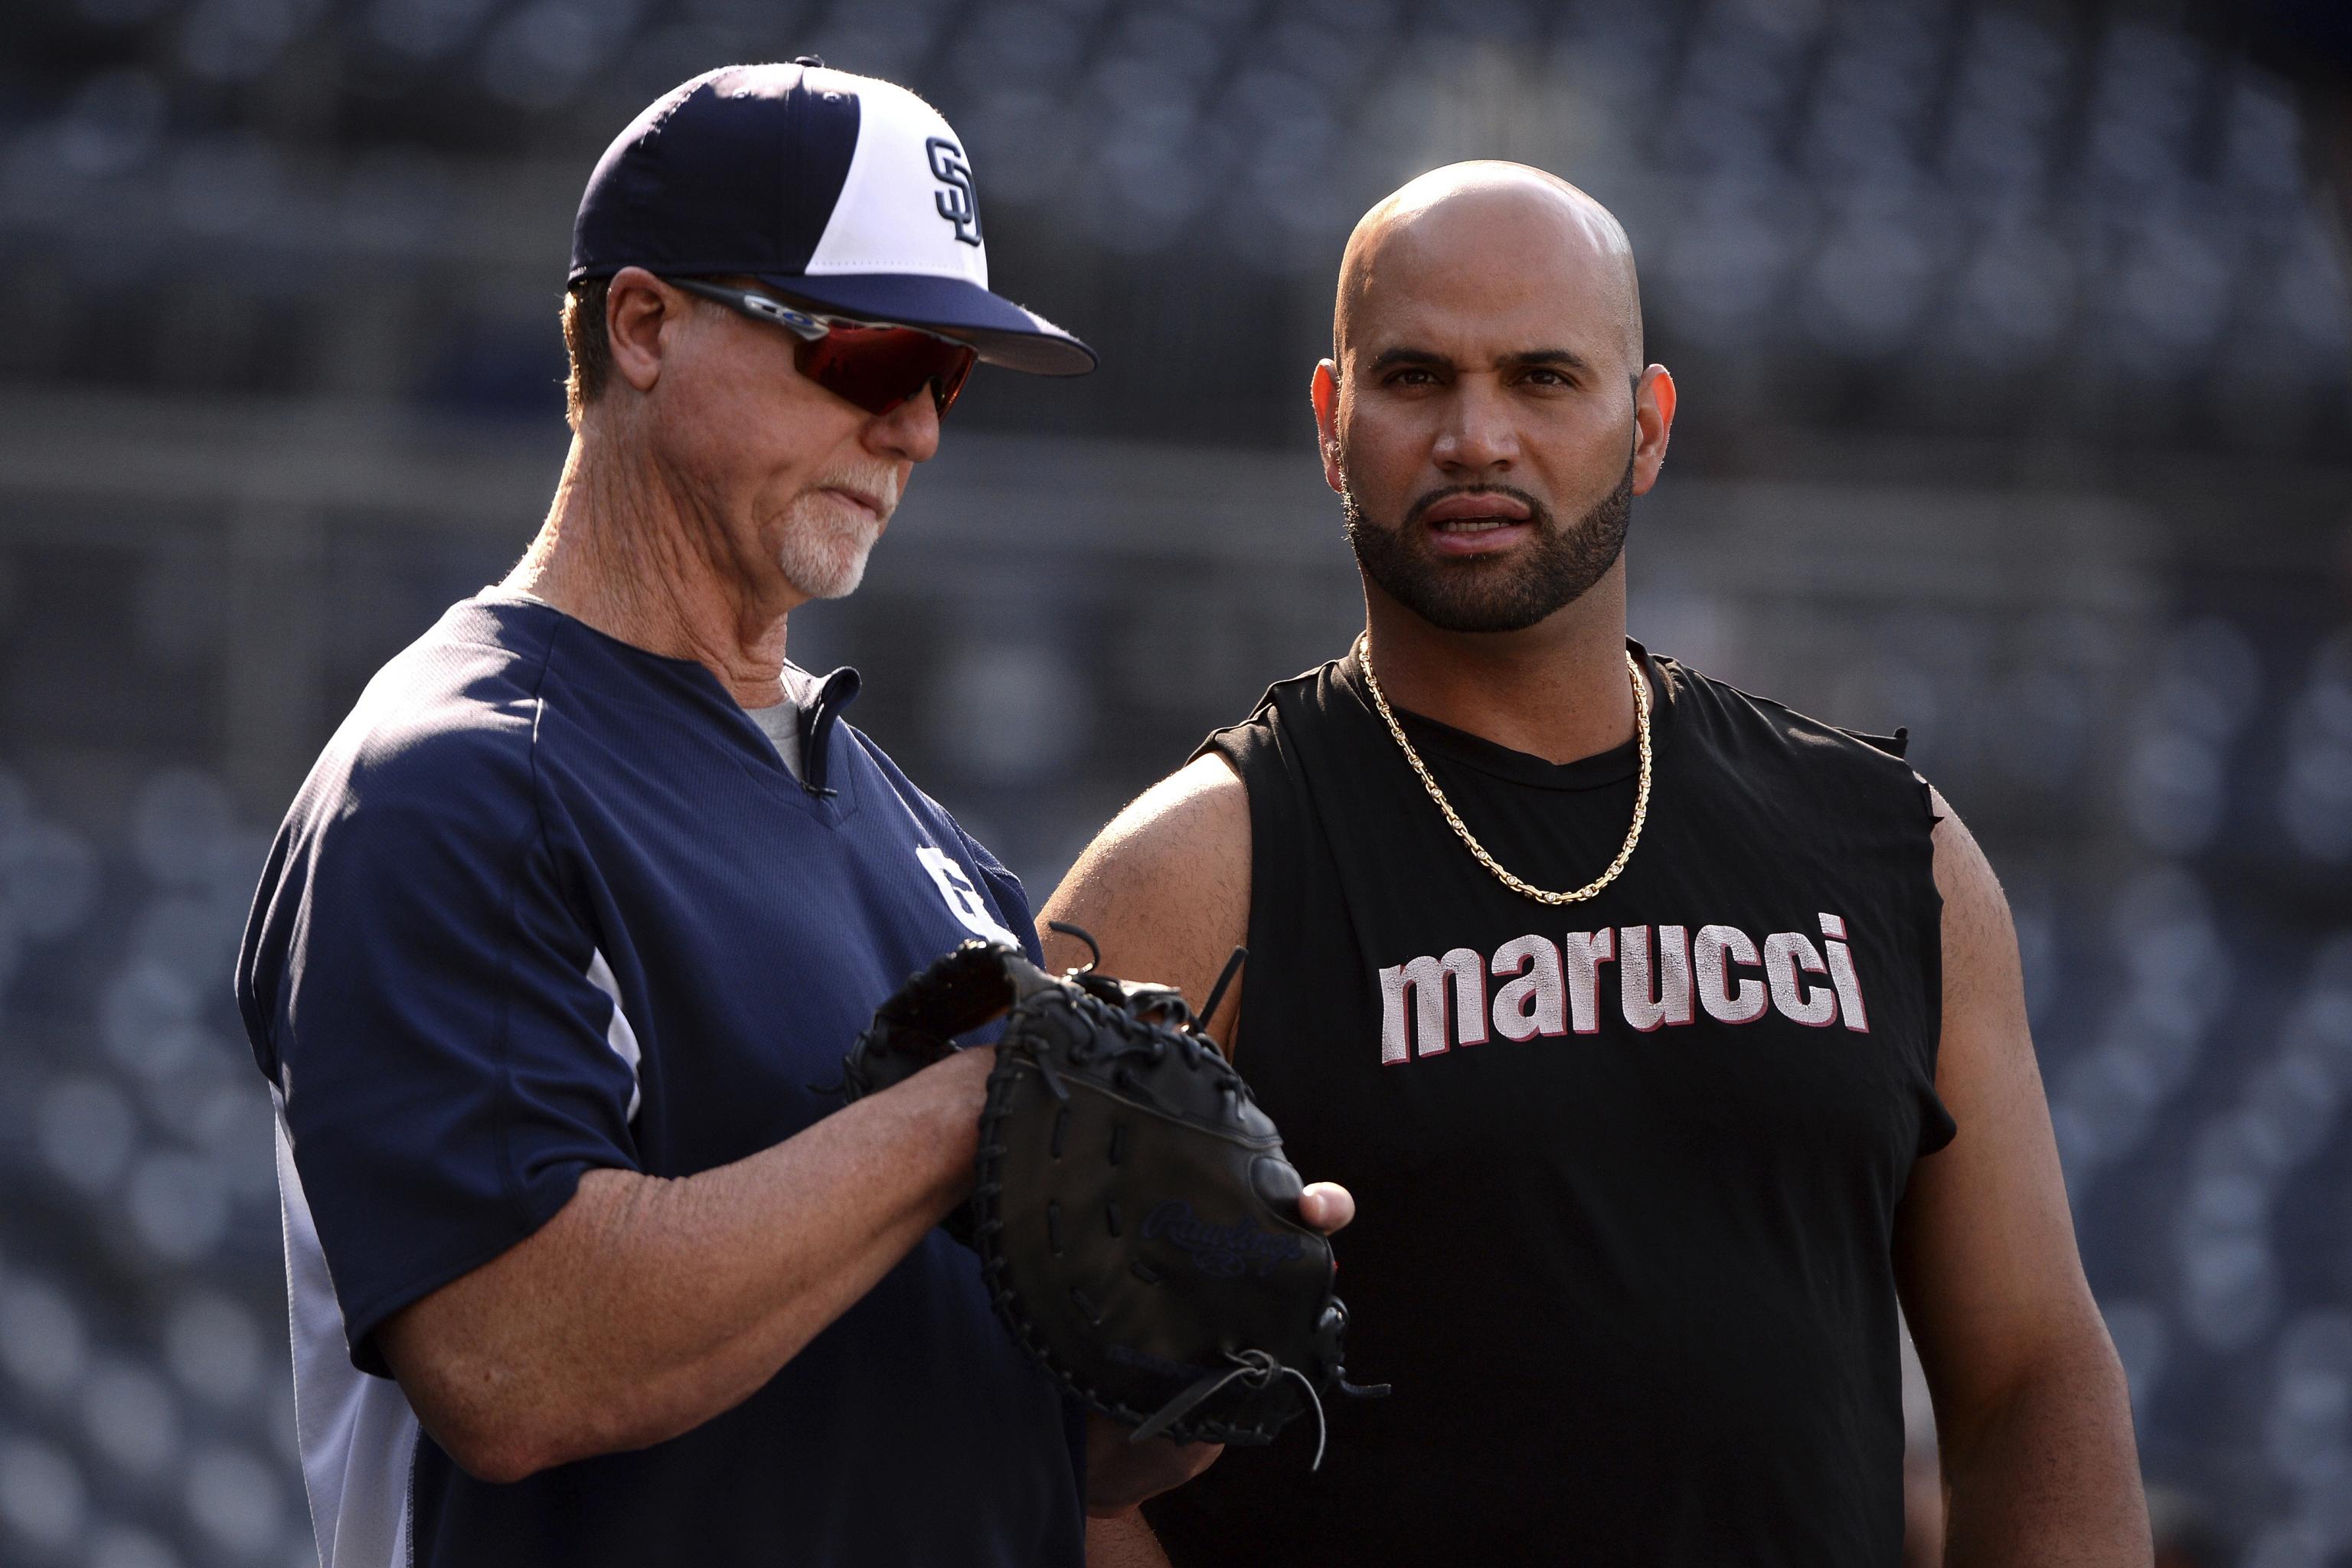 Padres Bench Coach Mark McGwire Quits After 3 Seasons with Team